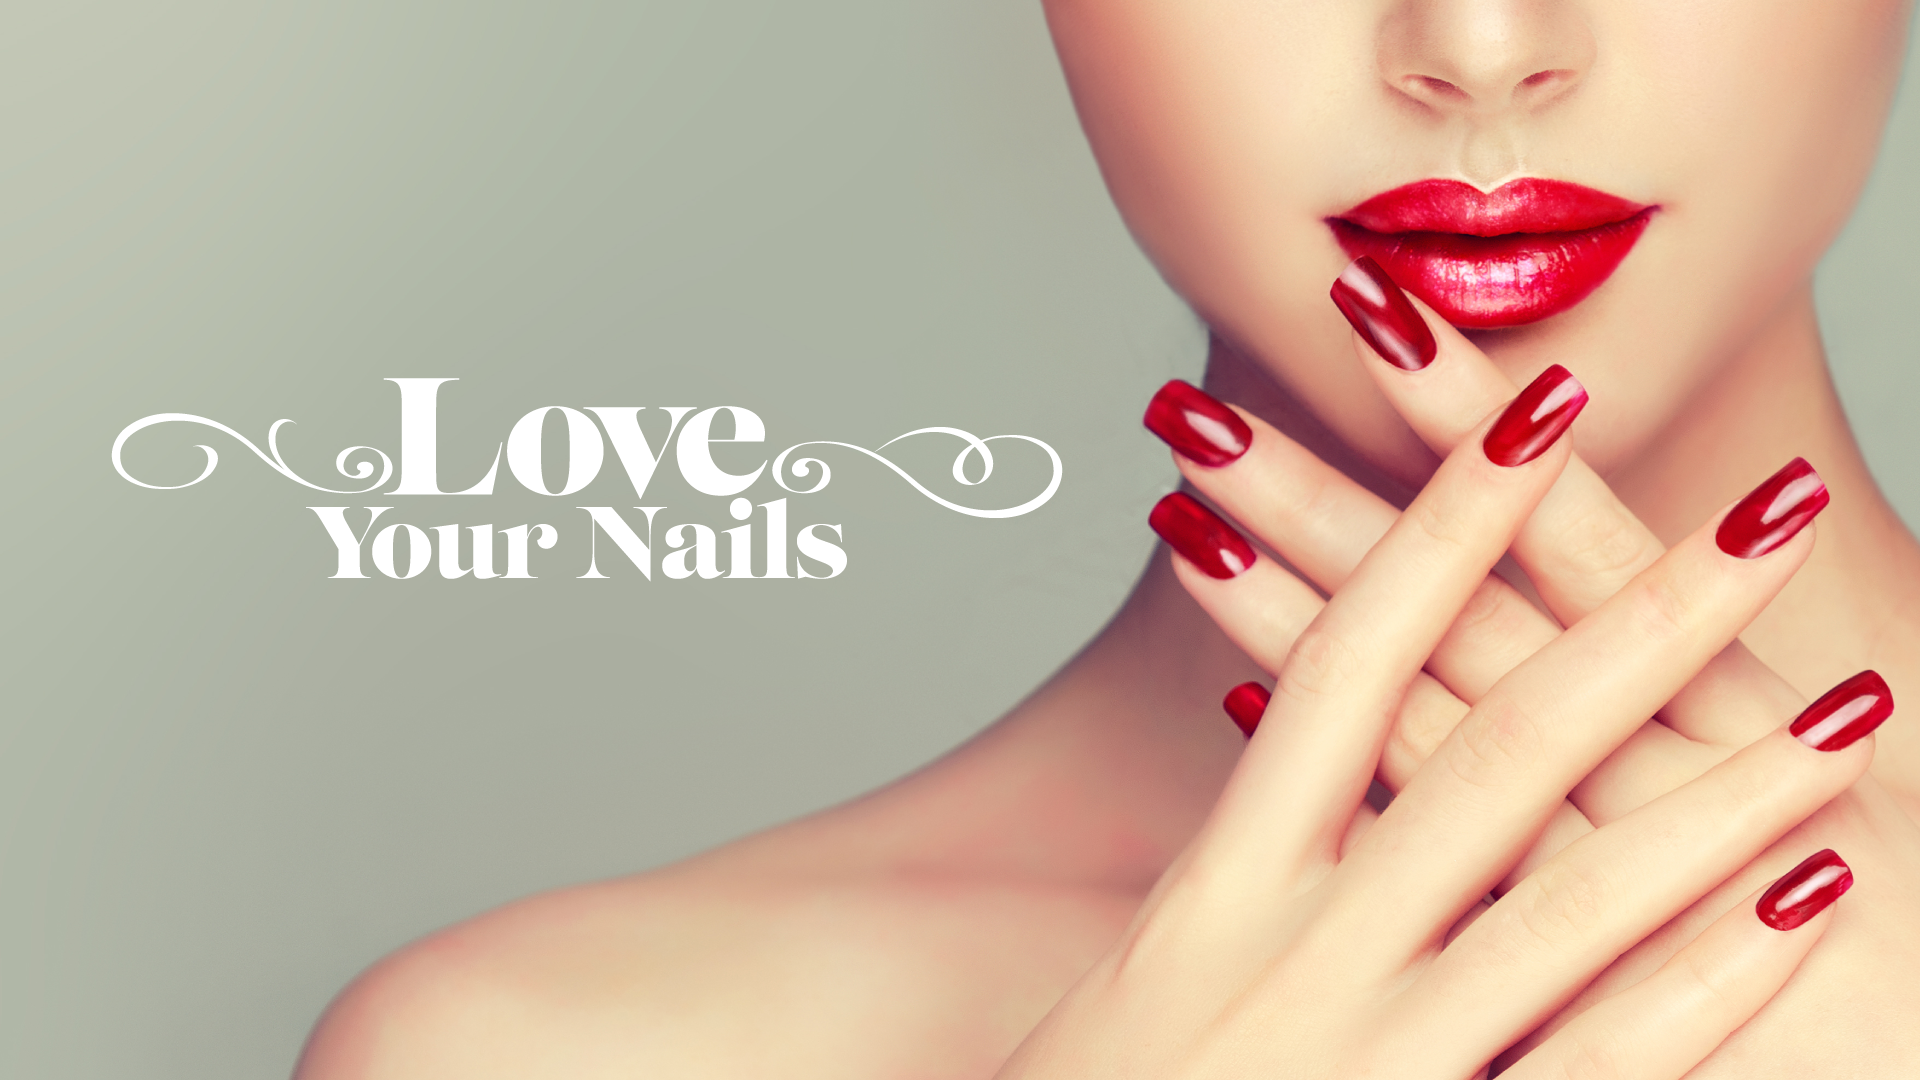 Love Your Nails in Bandra West,Mumbai - Best Beauty Parlours For Nail Art  in Mumbai - Justdial